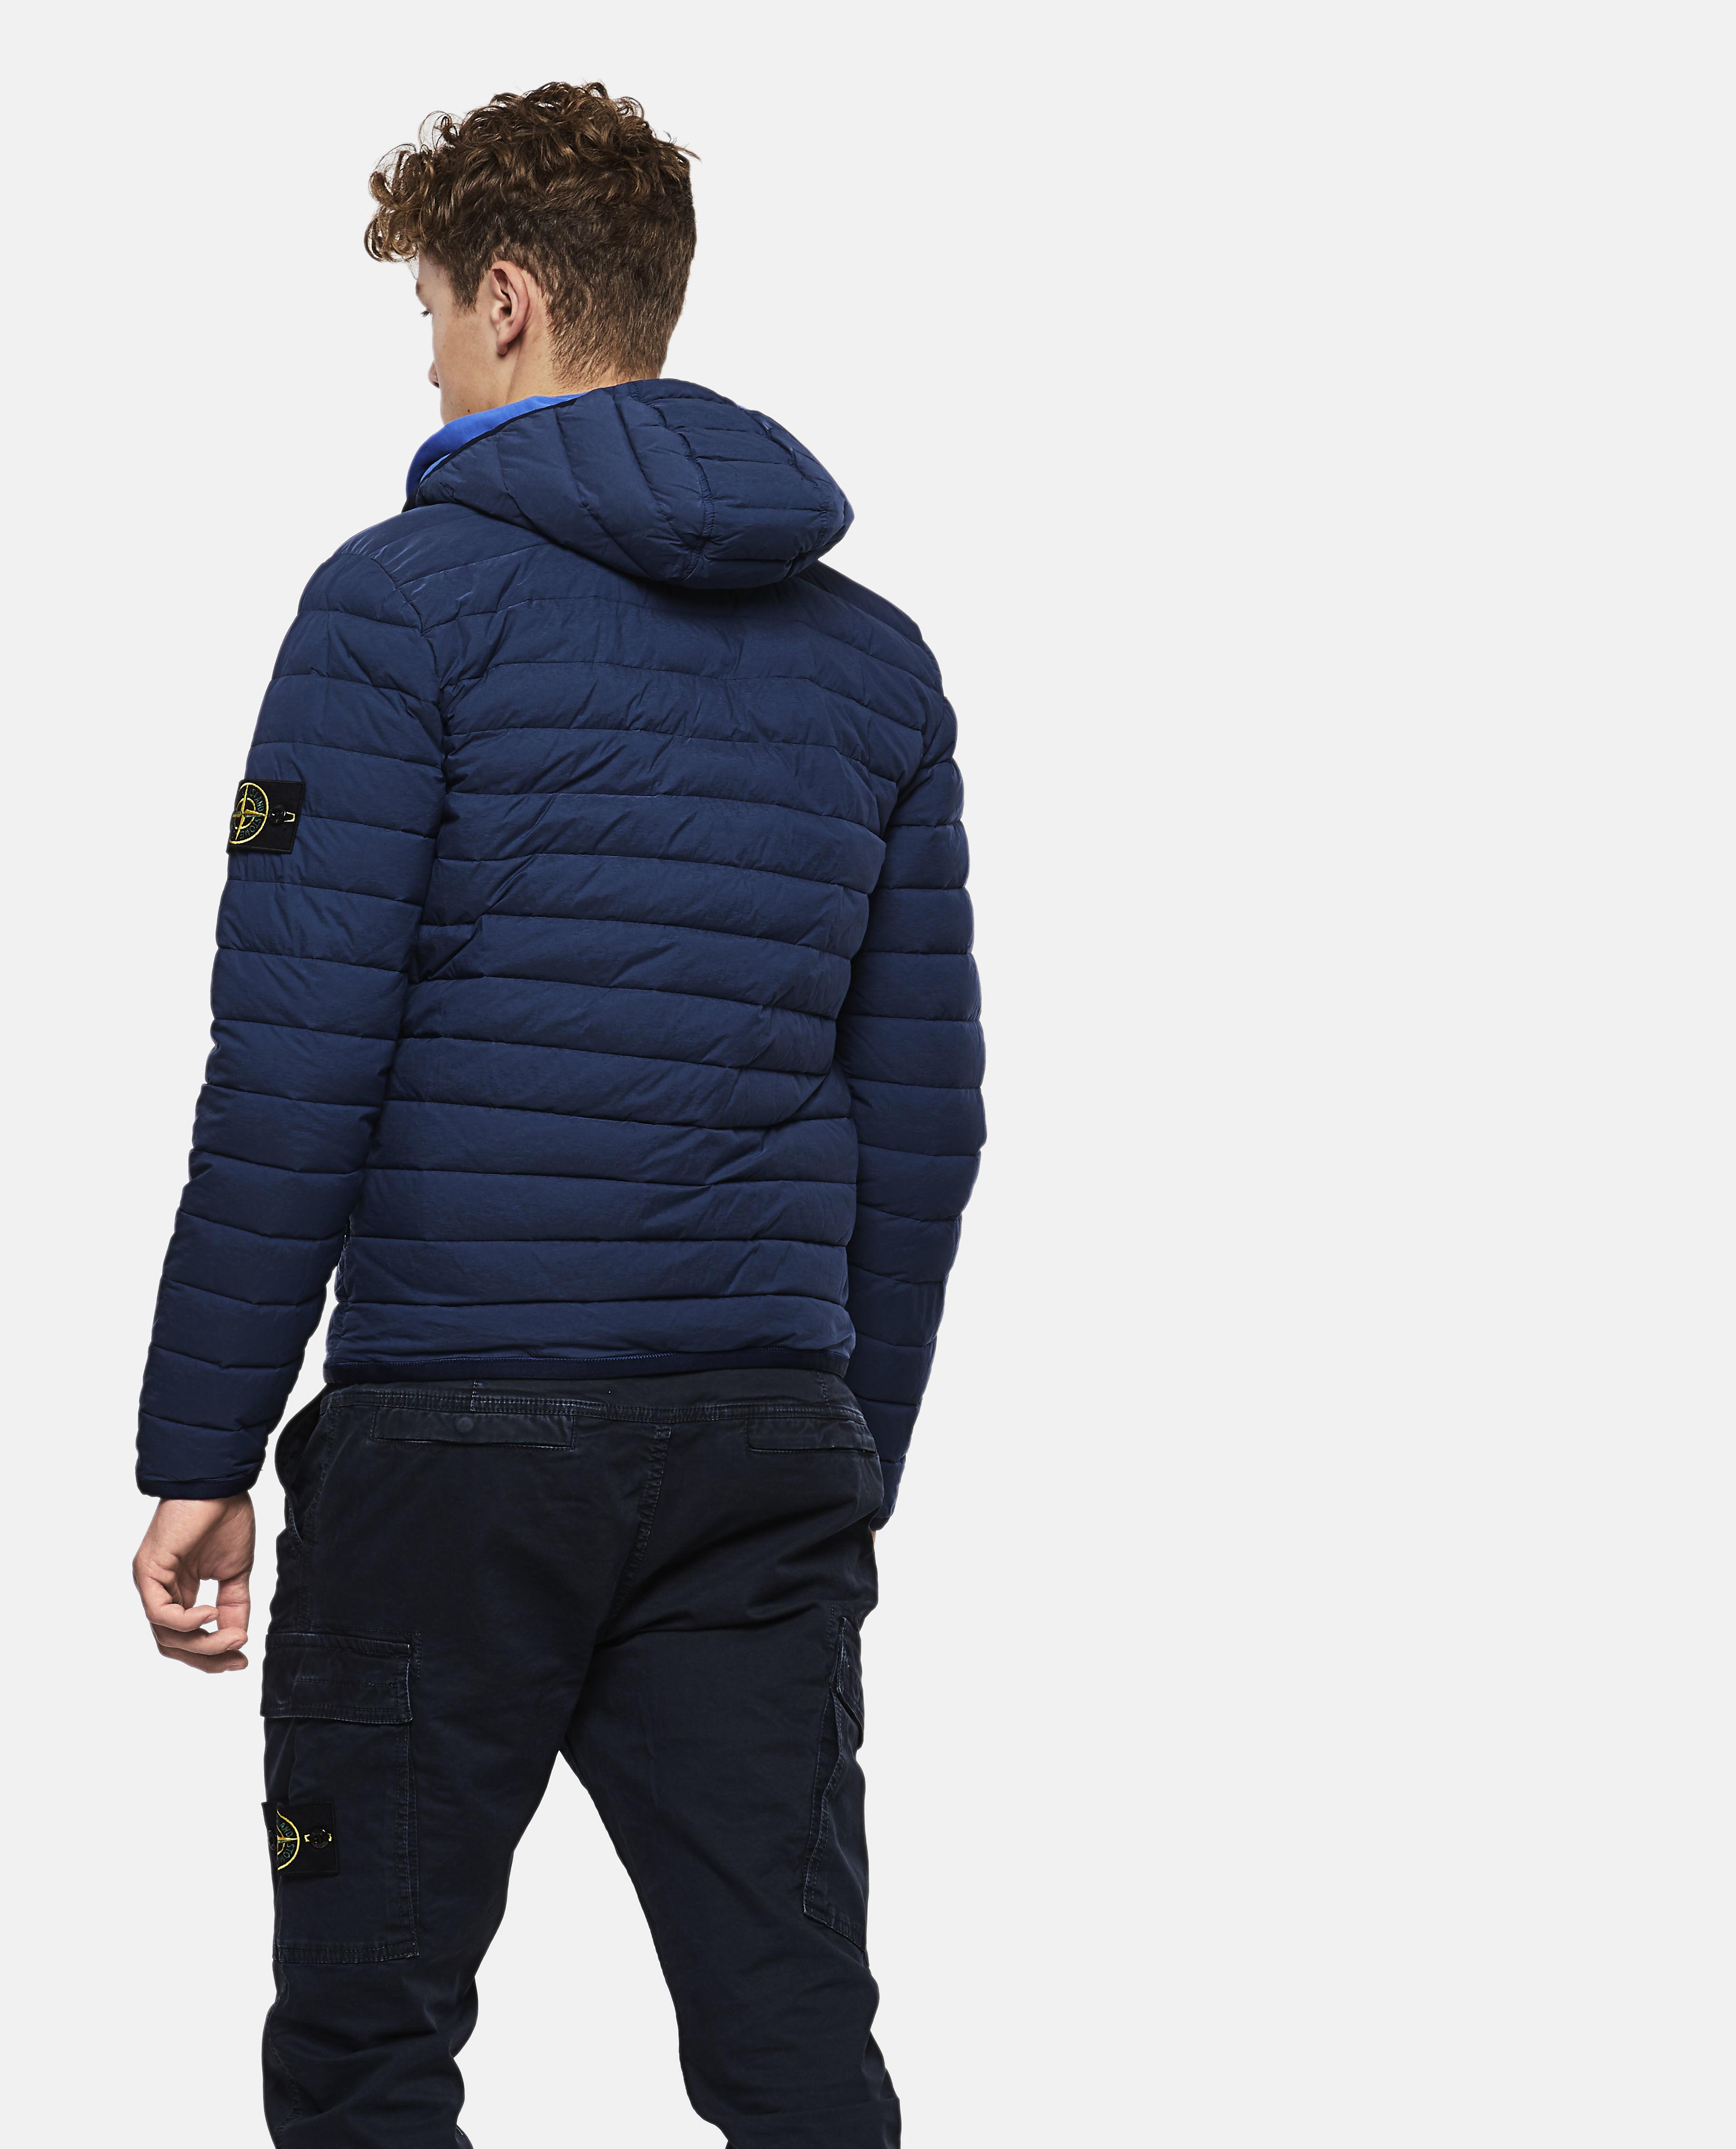 Stone Island Synthetic Zip Hooded Loom Down Jacket in Blue for Men - Lyst